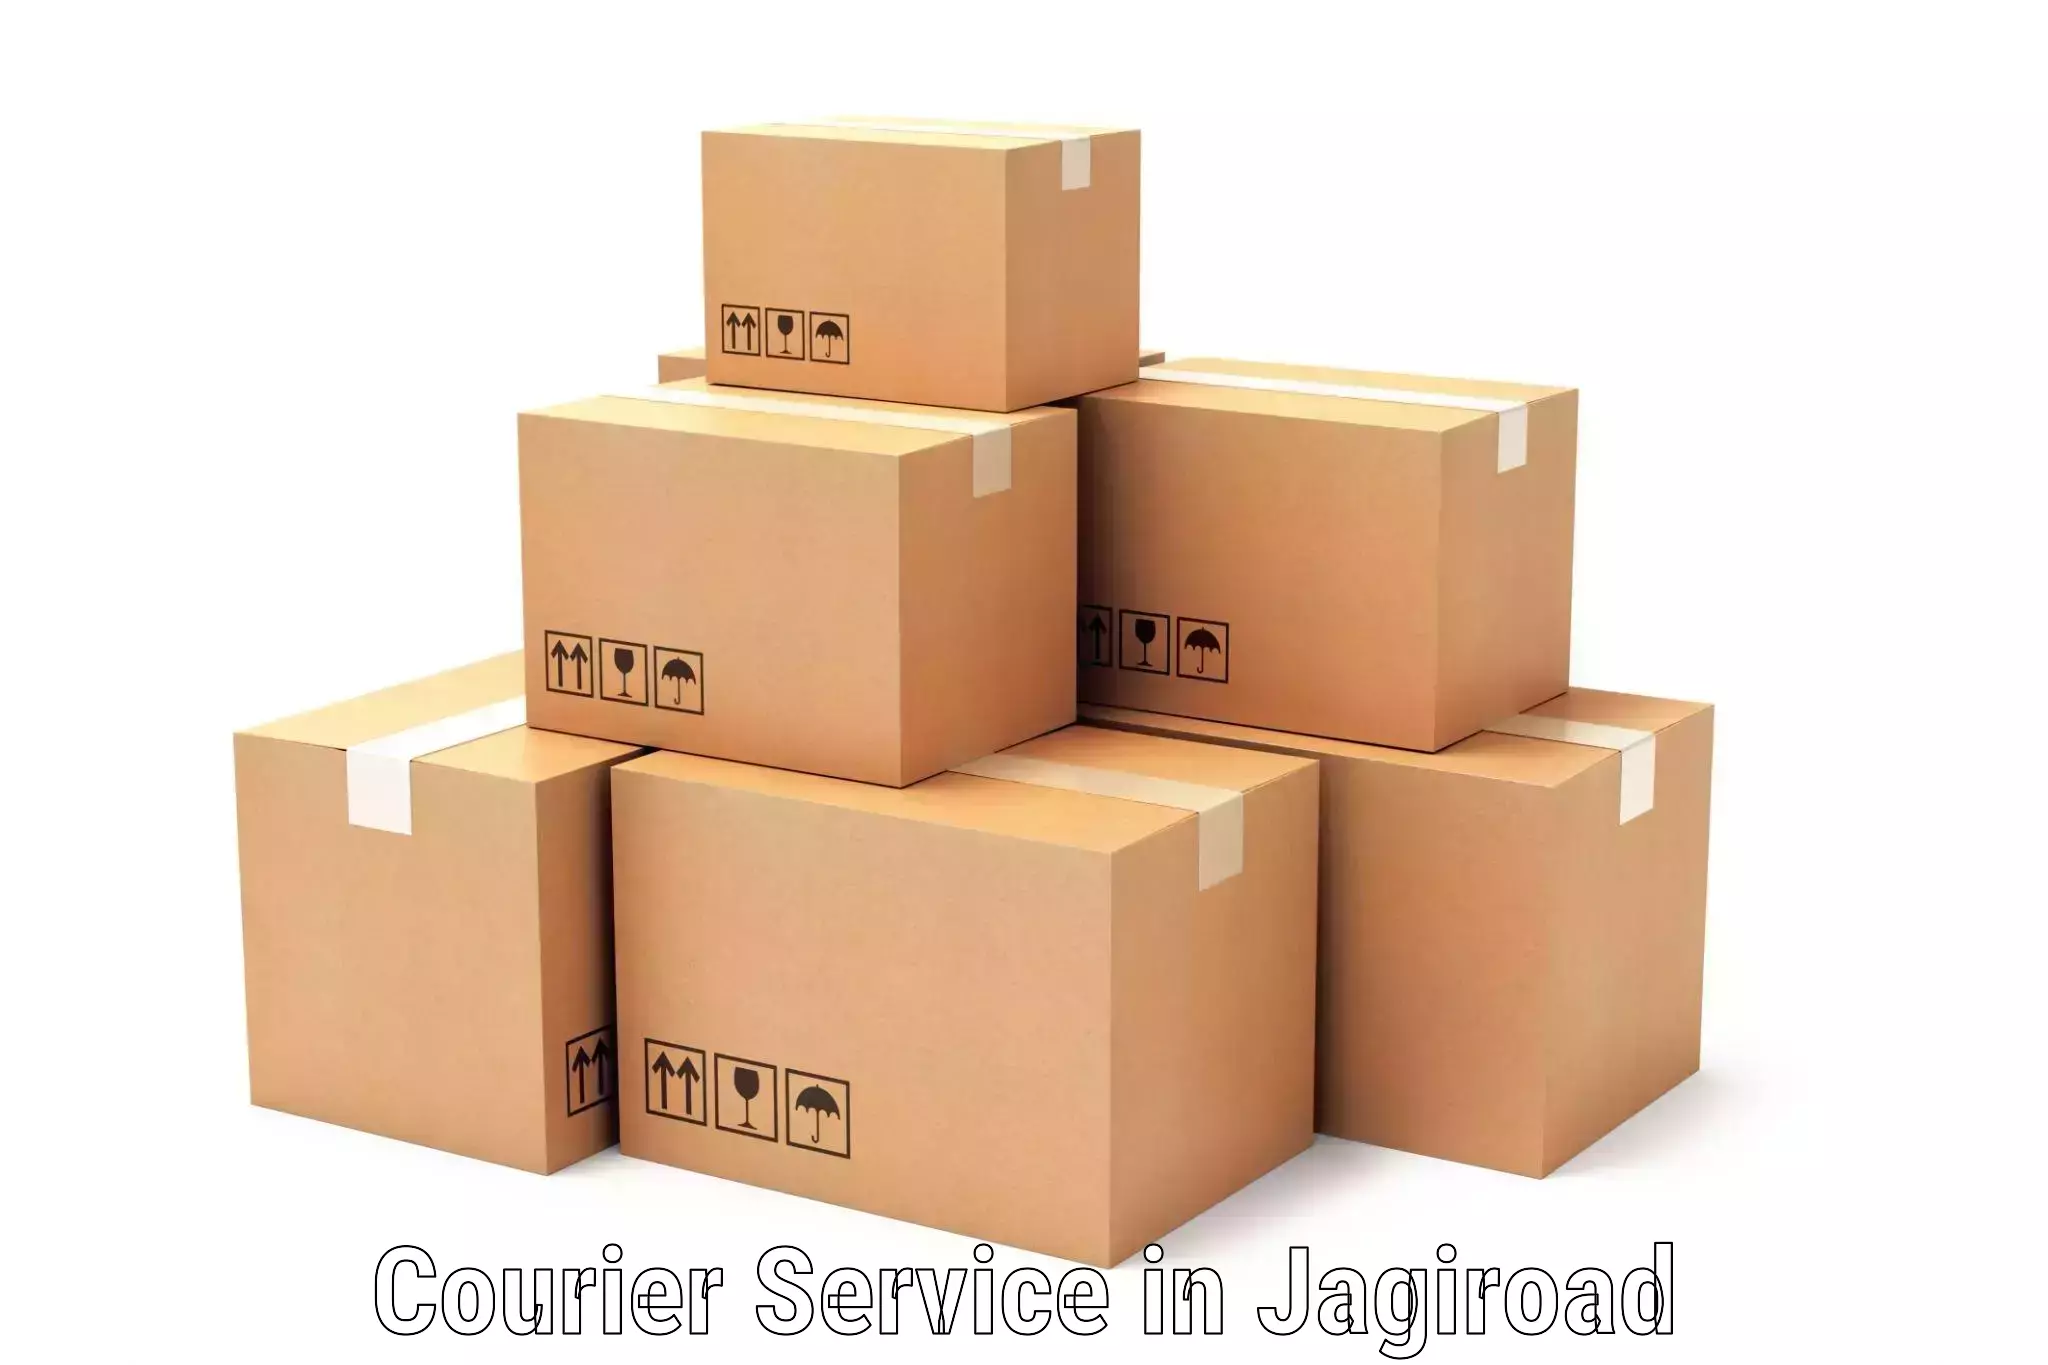 Urban courier service in Jagiroad